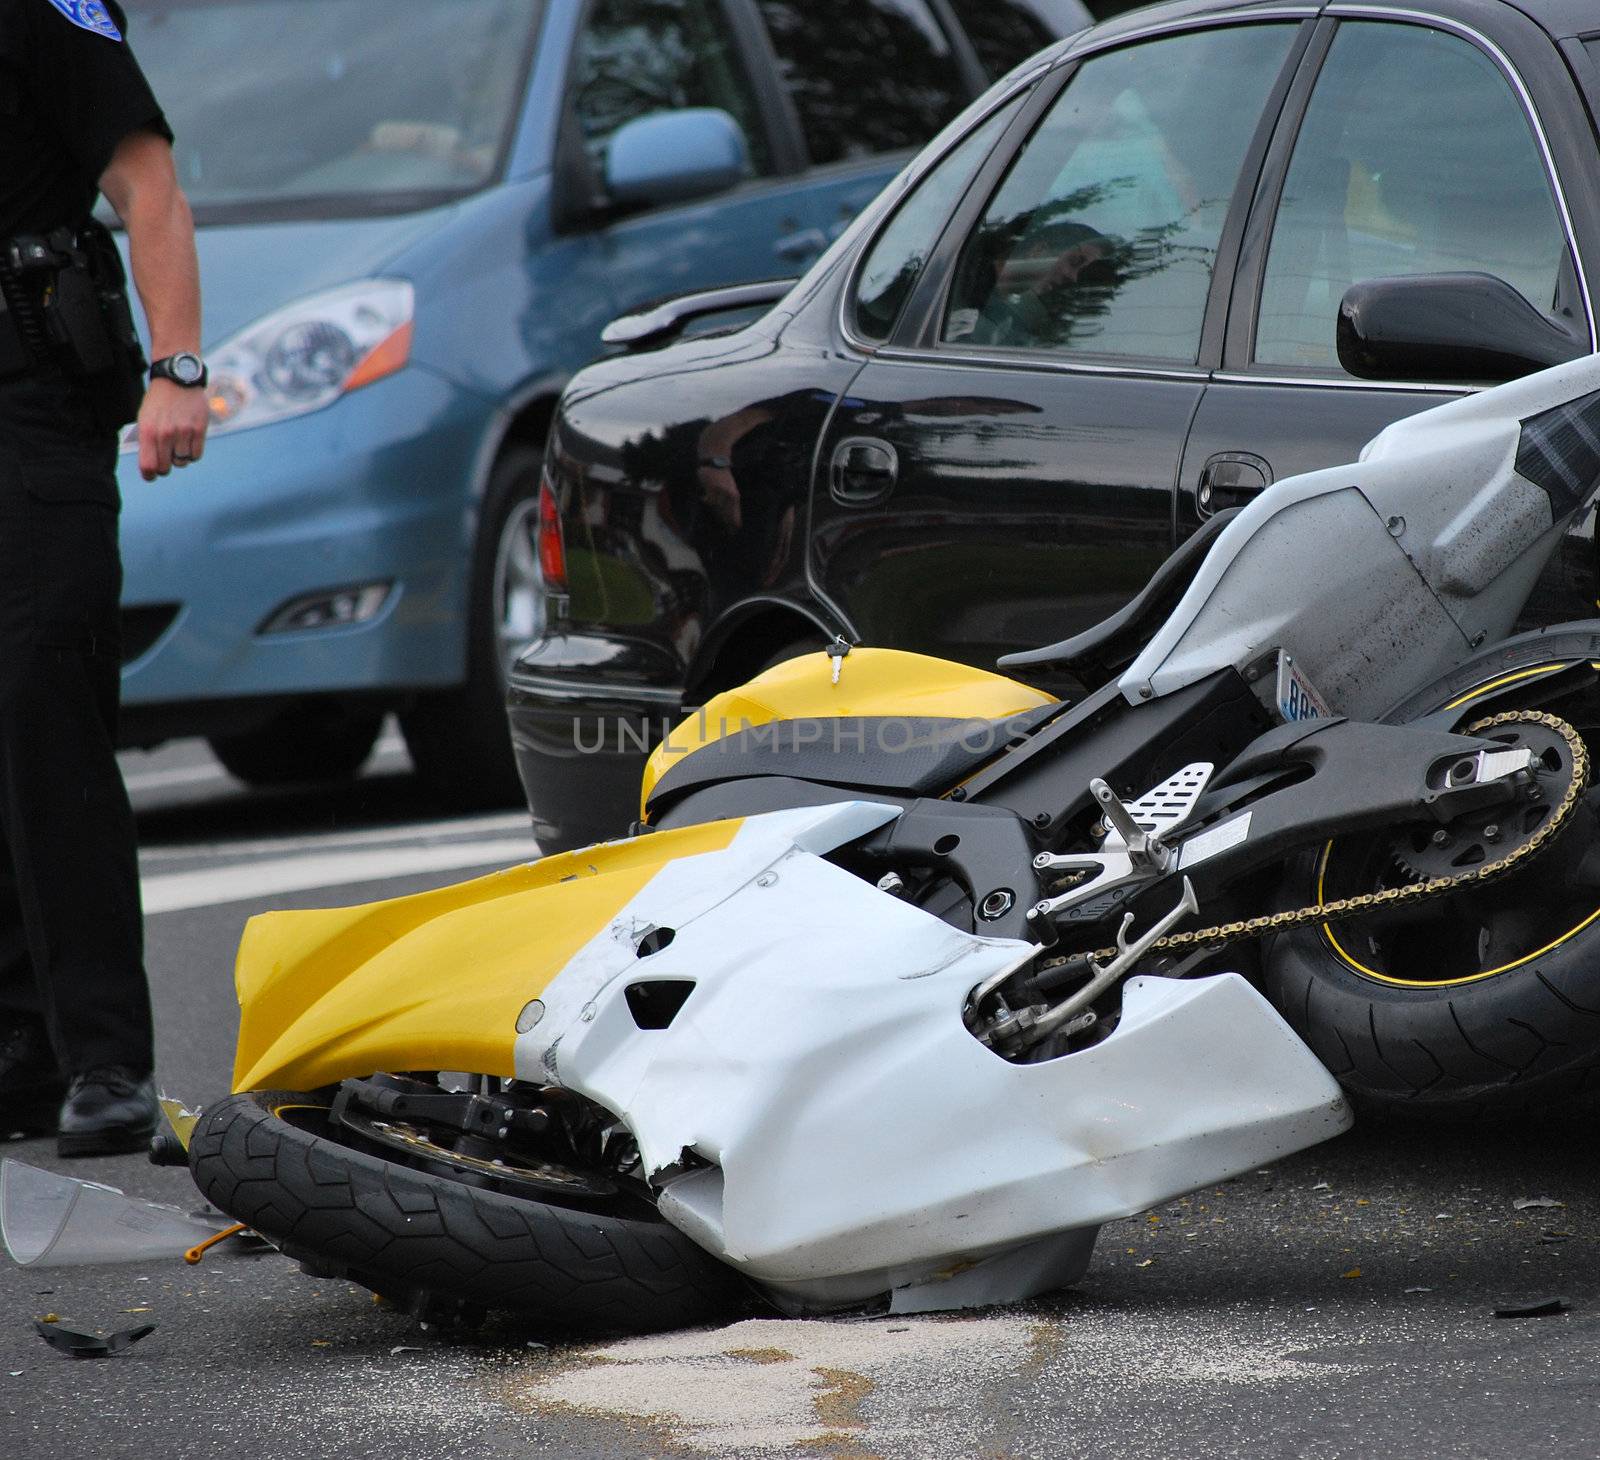 Motorcycle accident on a public street.